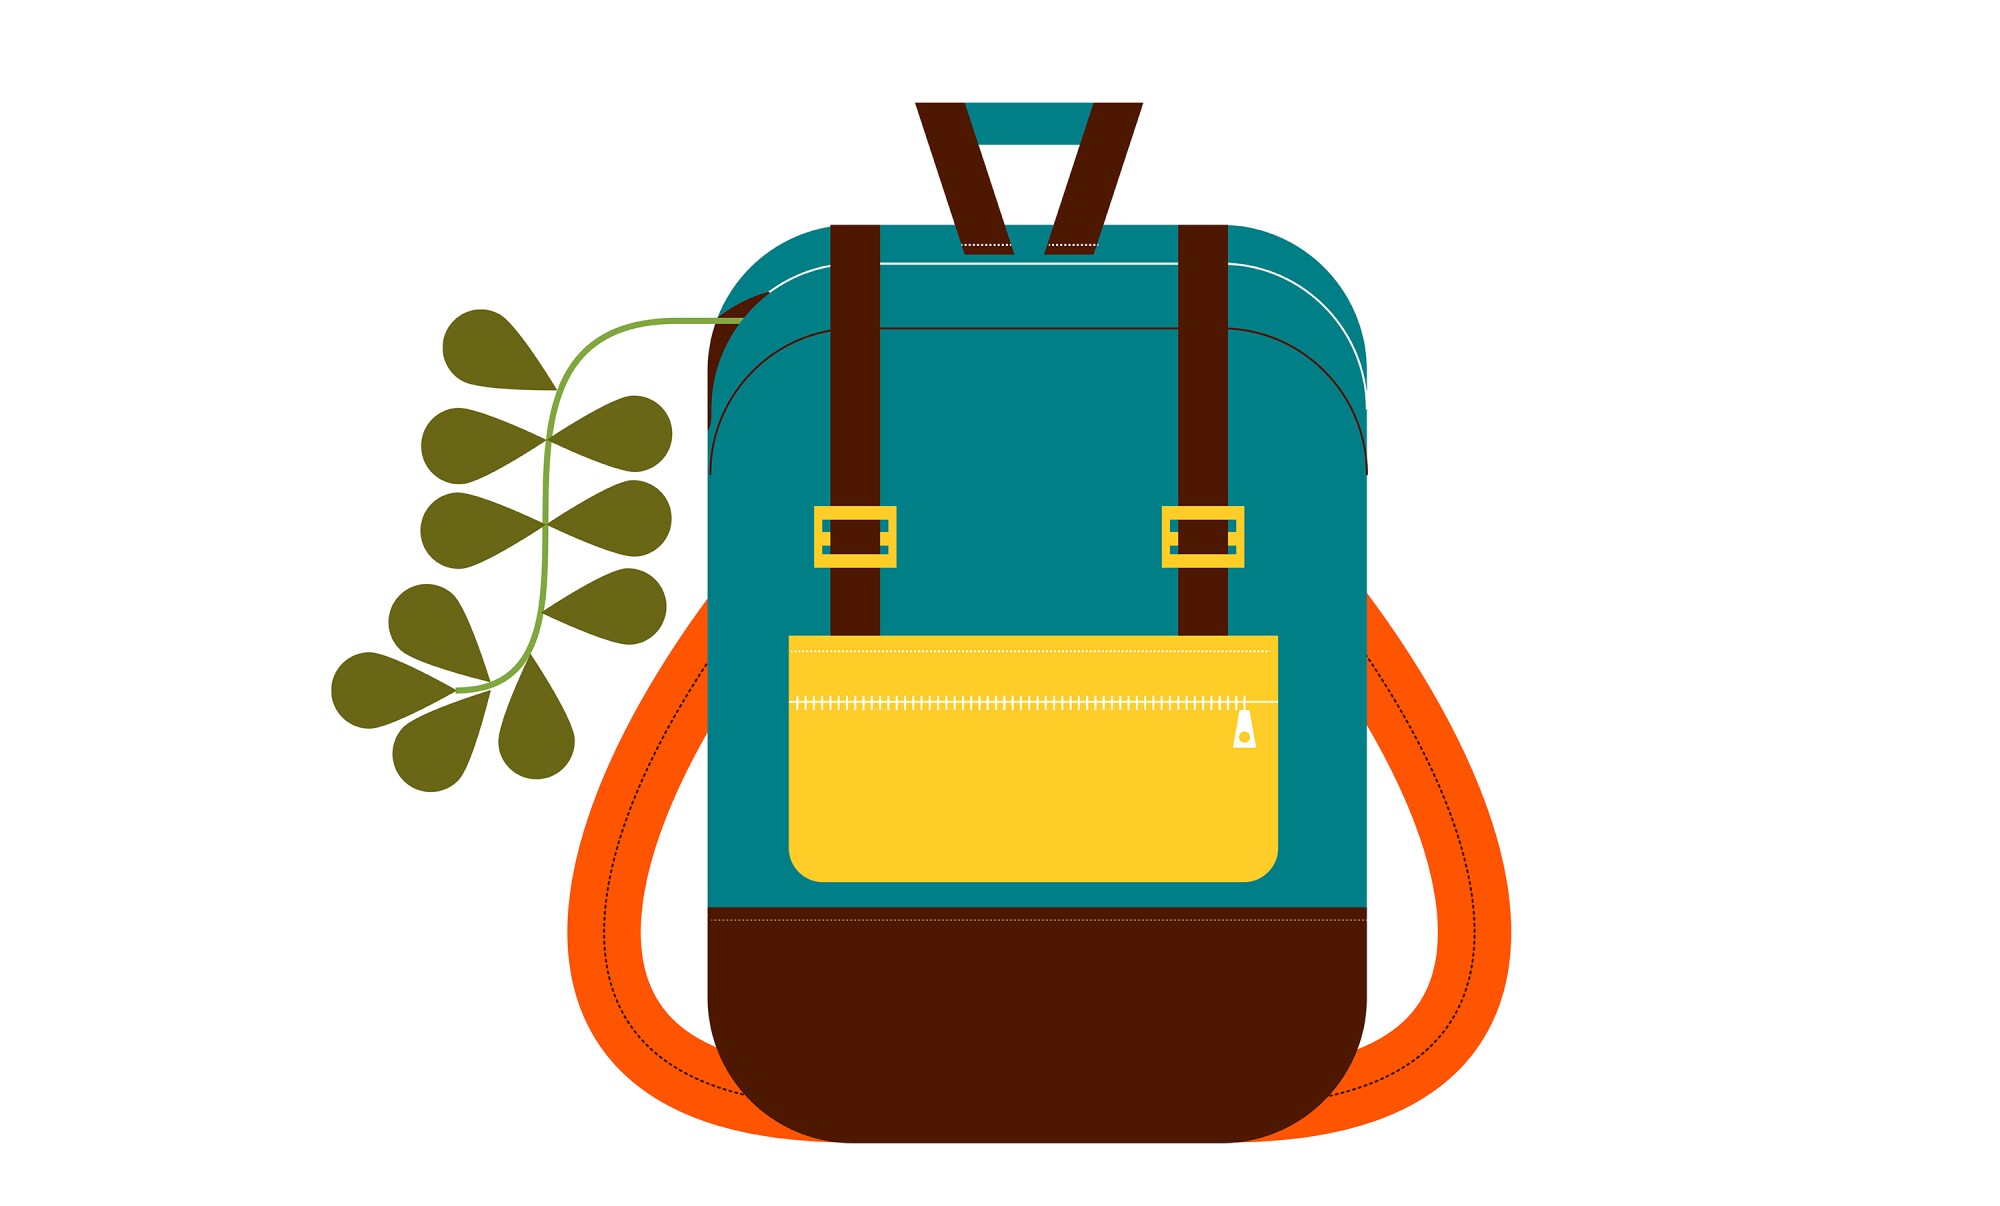 Illustration of a backpack with a leafy vine coming out of the zipper pouch.